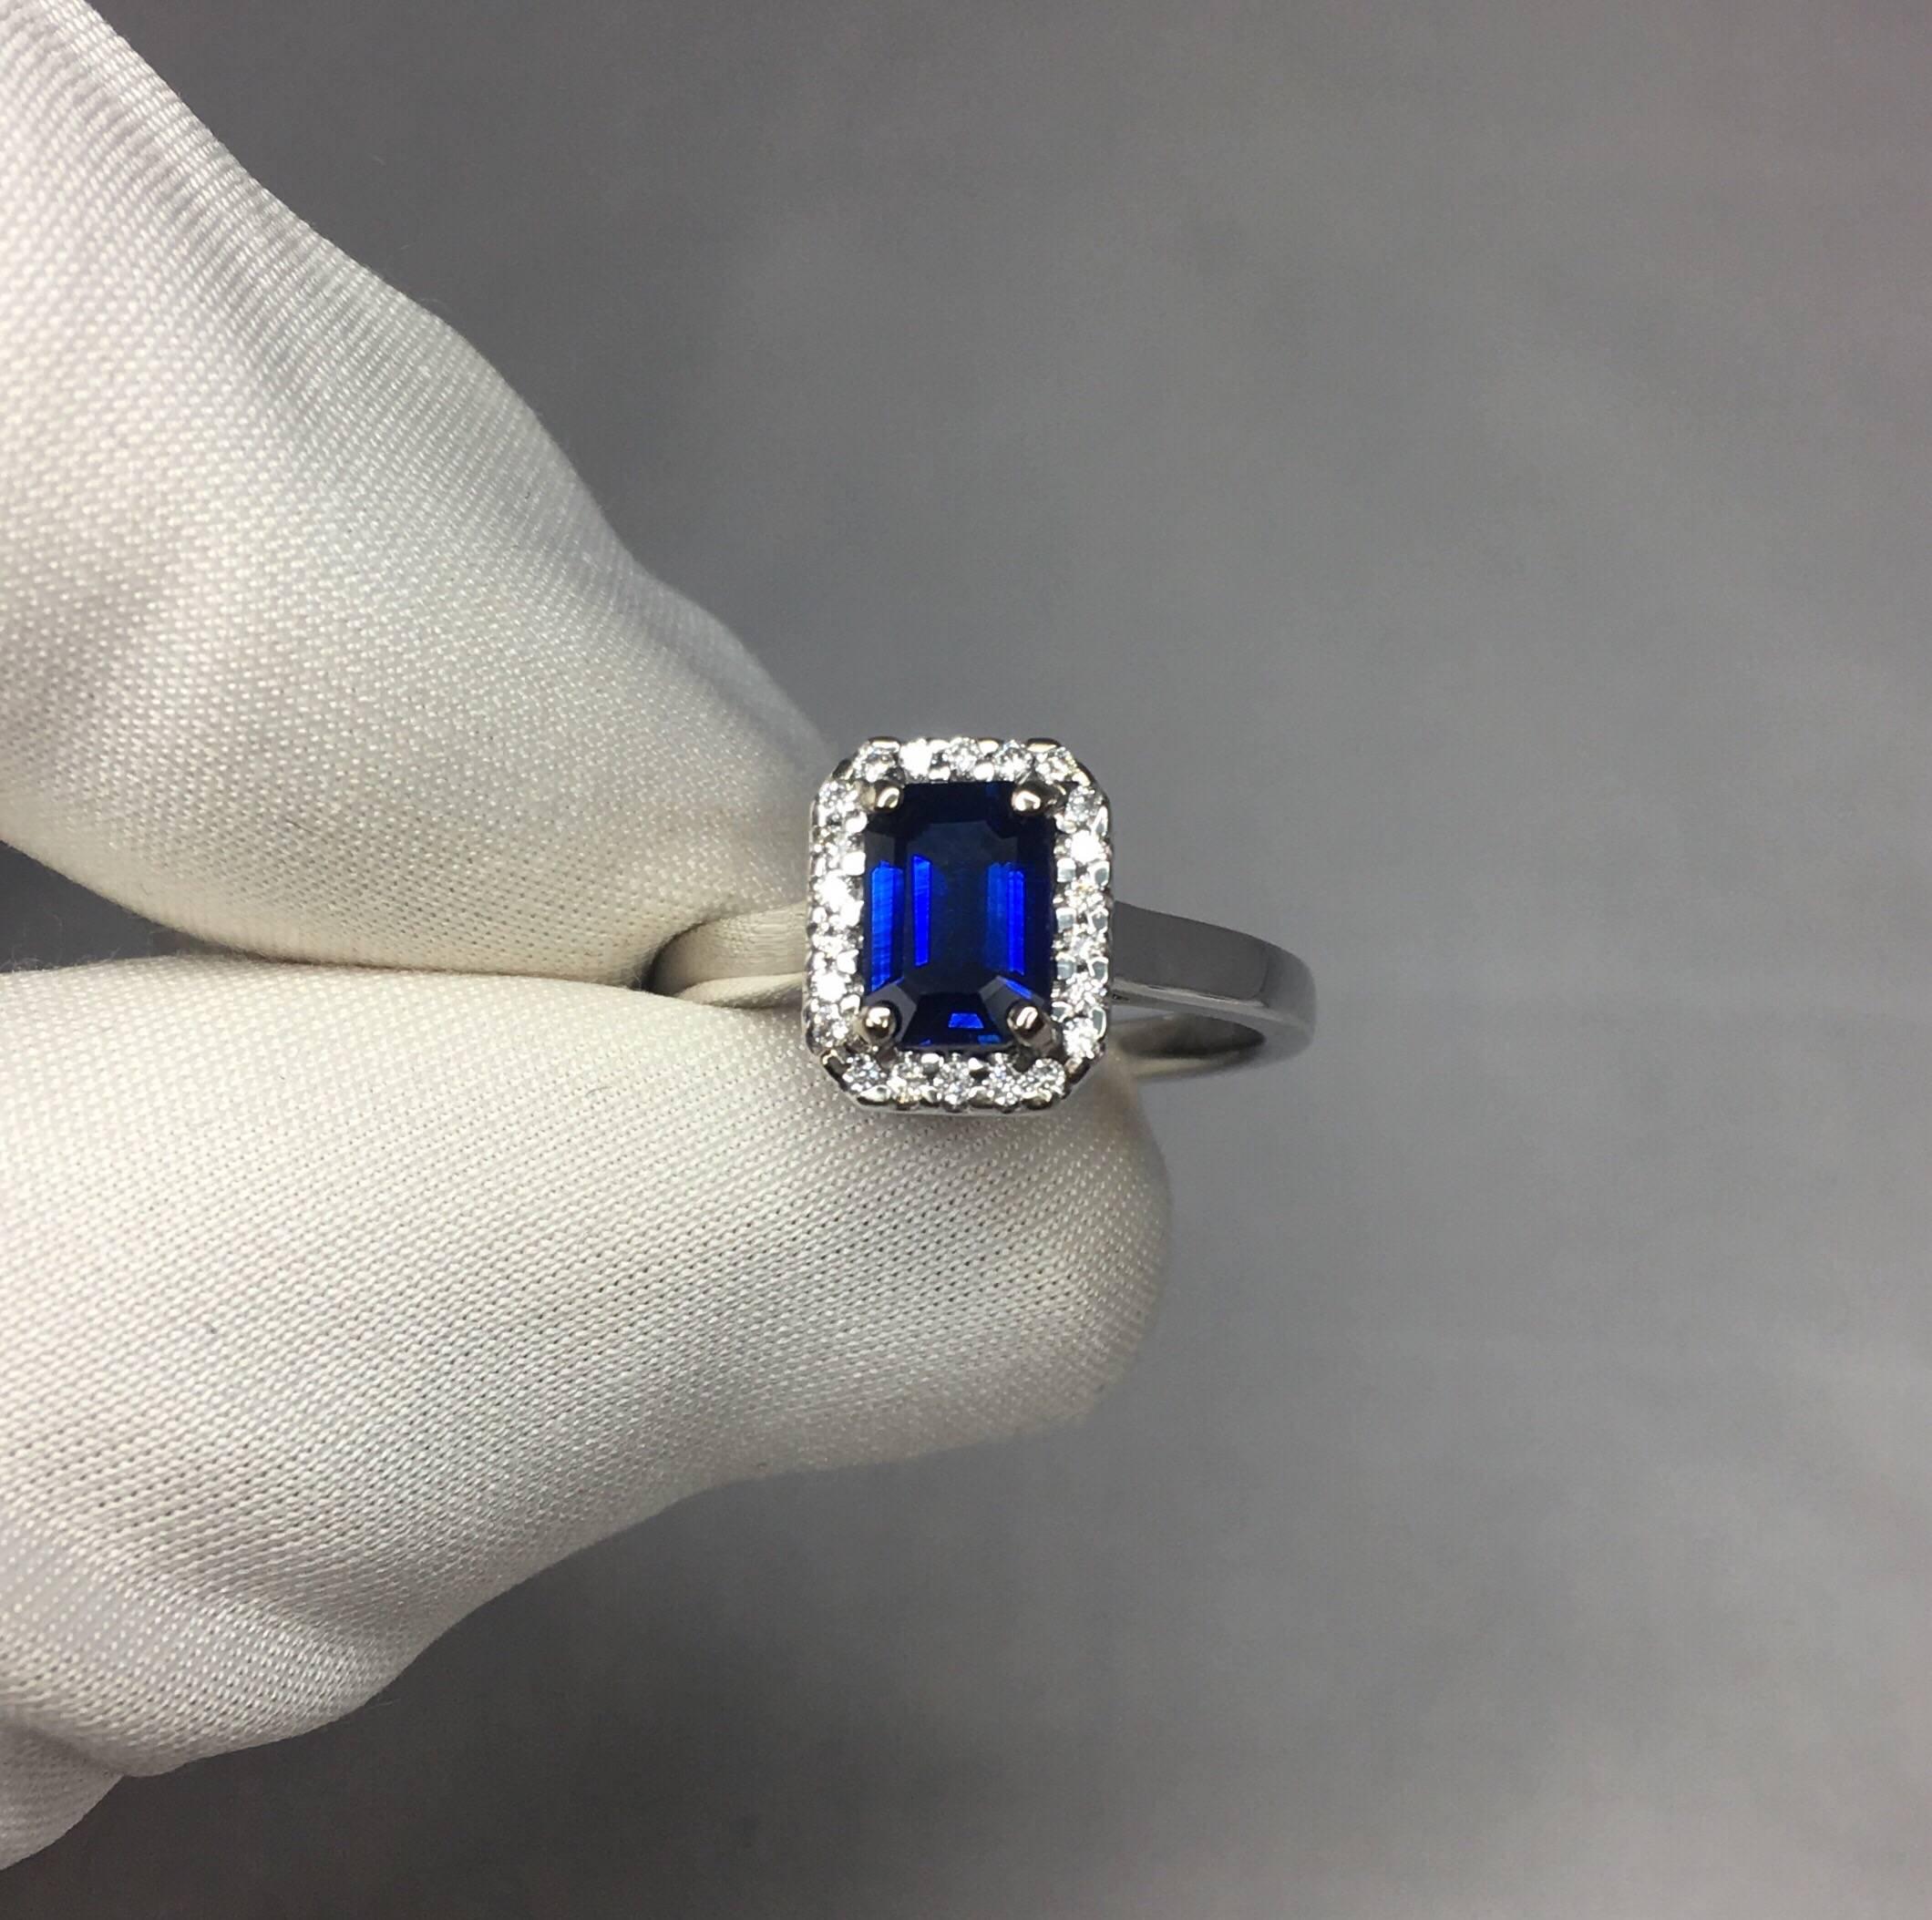 Stunning natural deep blue Ceylon sapphire set in a fine 18k white gold diamond cluster ring. 

1.00 carat centre sapphire with a fine deep but vivid blue colour and excellent clarity.

Also has an excellent emerald cut which shows the fine colour